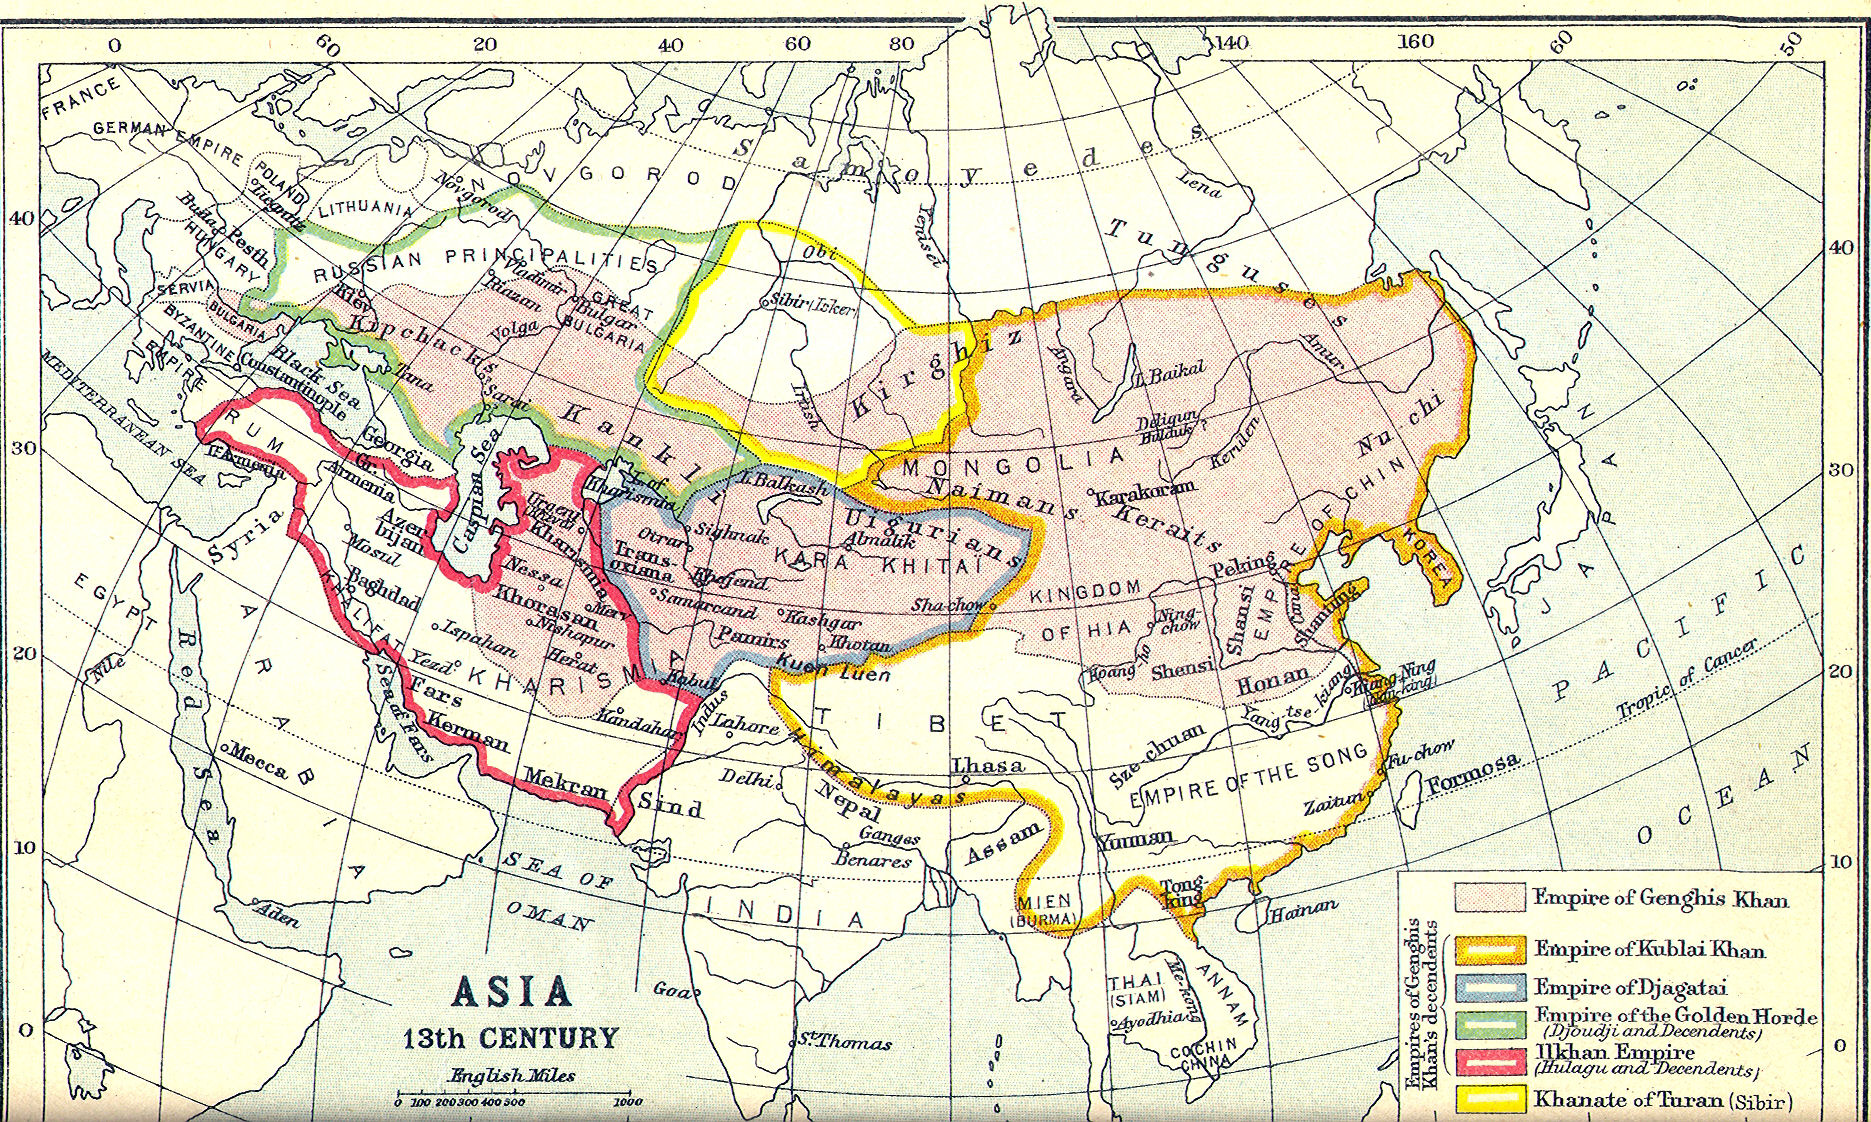 http://www.heritage-history.com/maps/lhasia/asia016.jpg